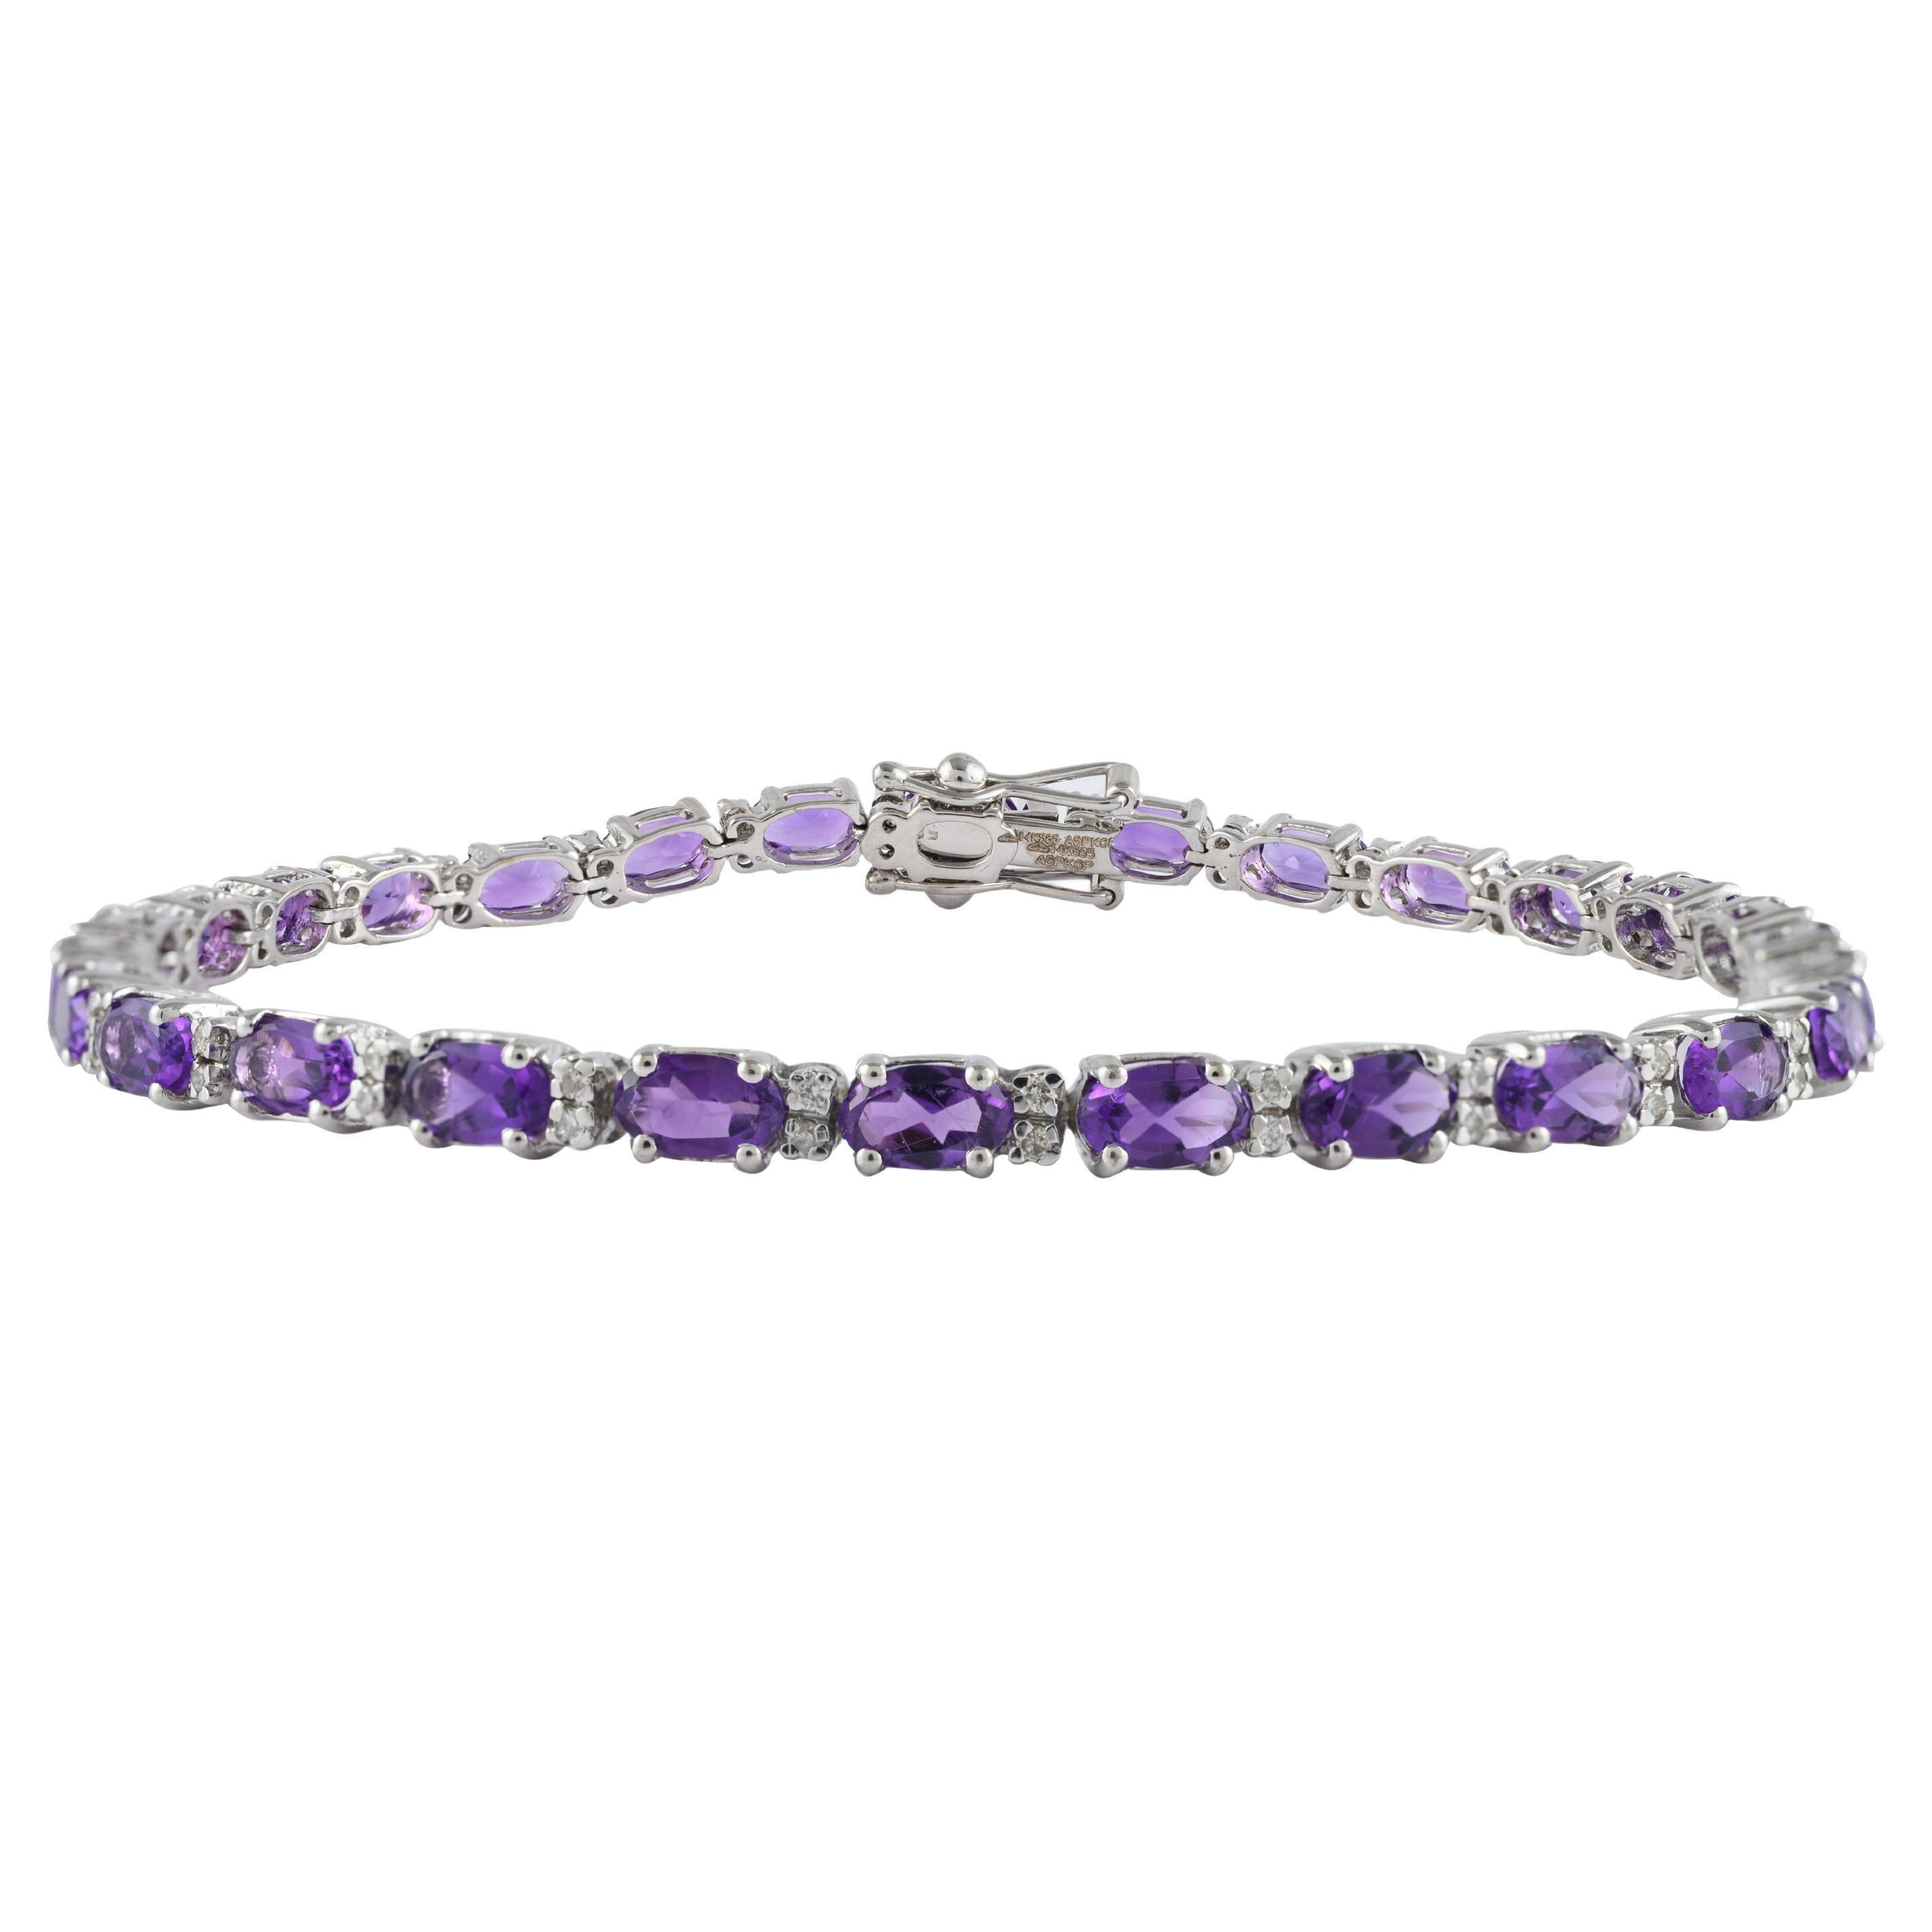 Solid 14K White Gold 5.65 Carat Amethyst Tennis Bracelet with Diamonds For Sale